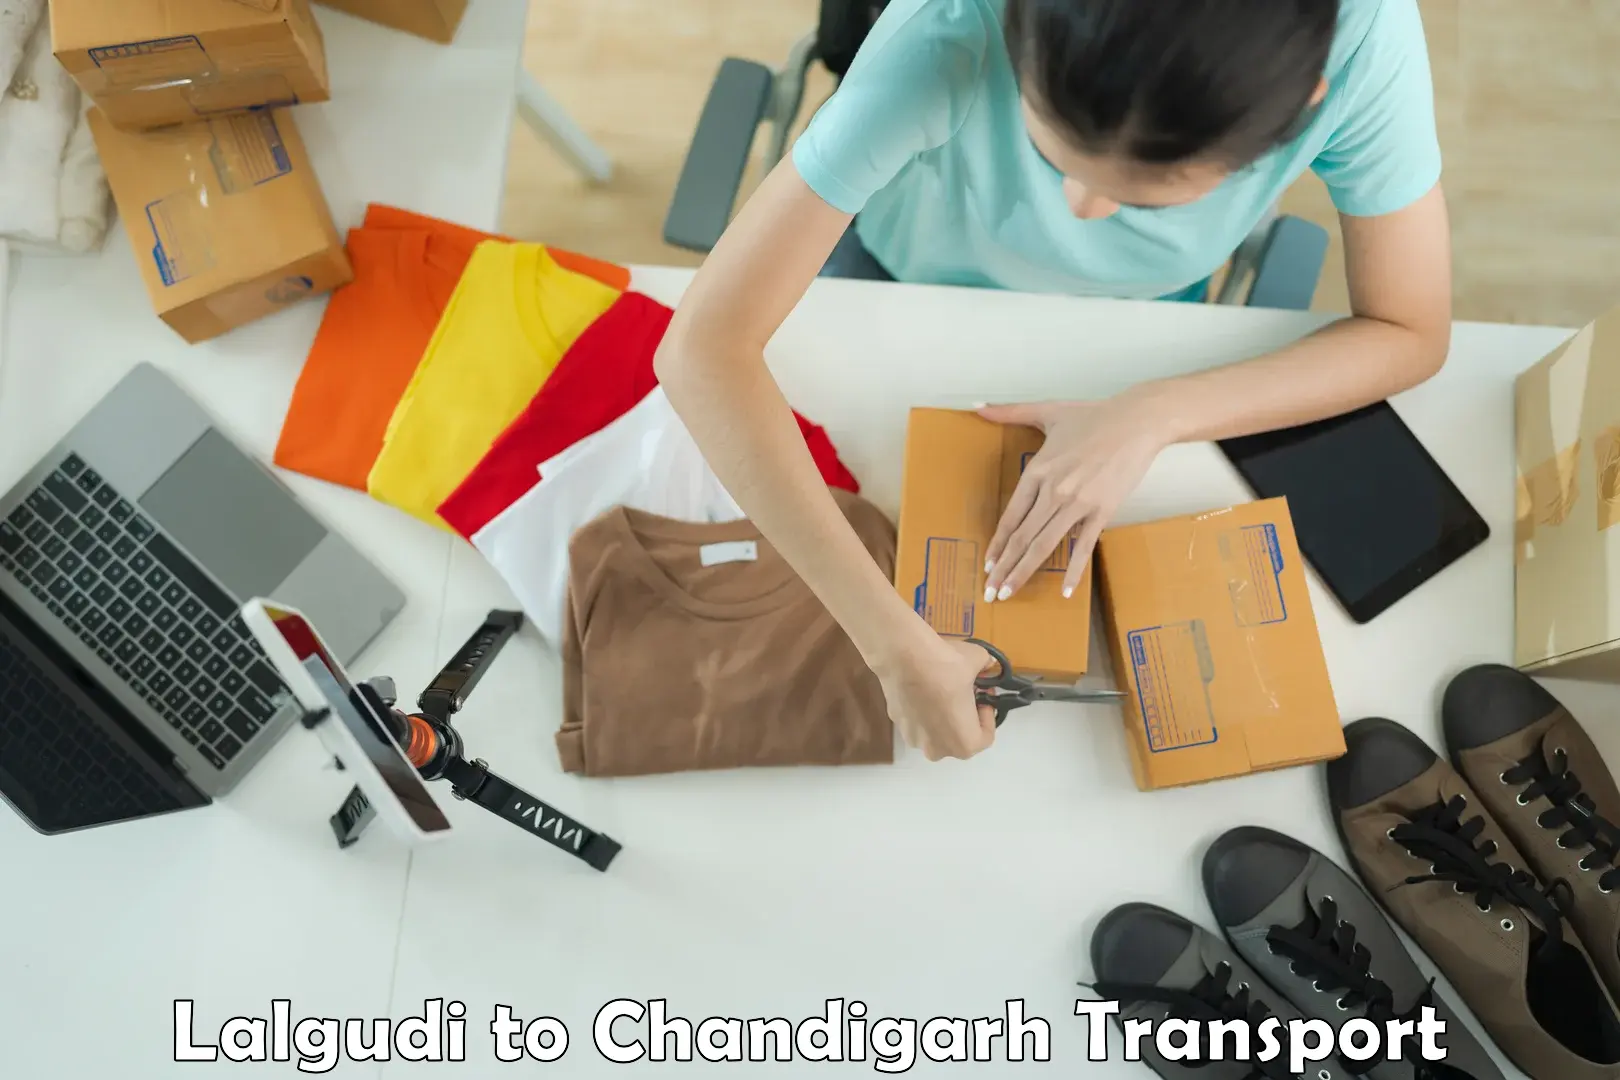 Commercial transport service Lalgudi to Chandigarh